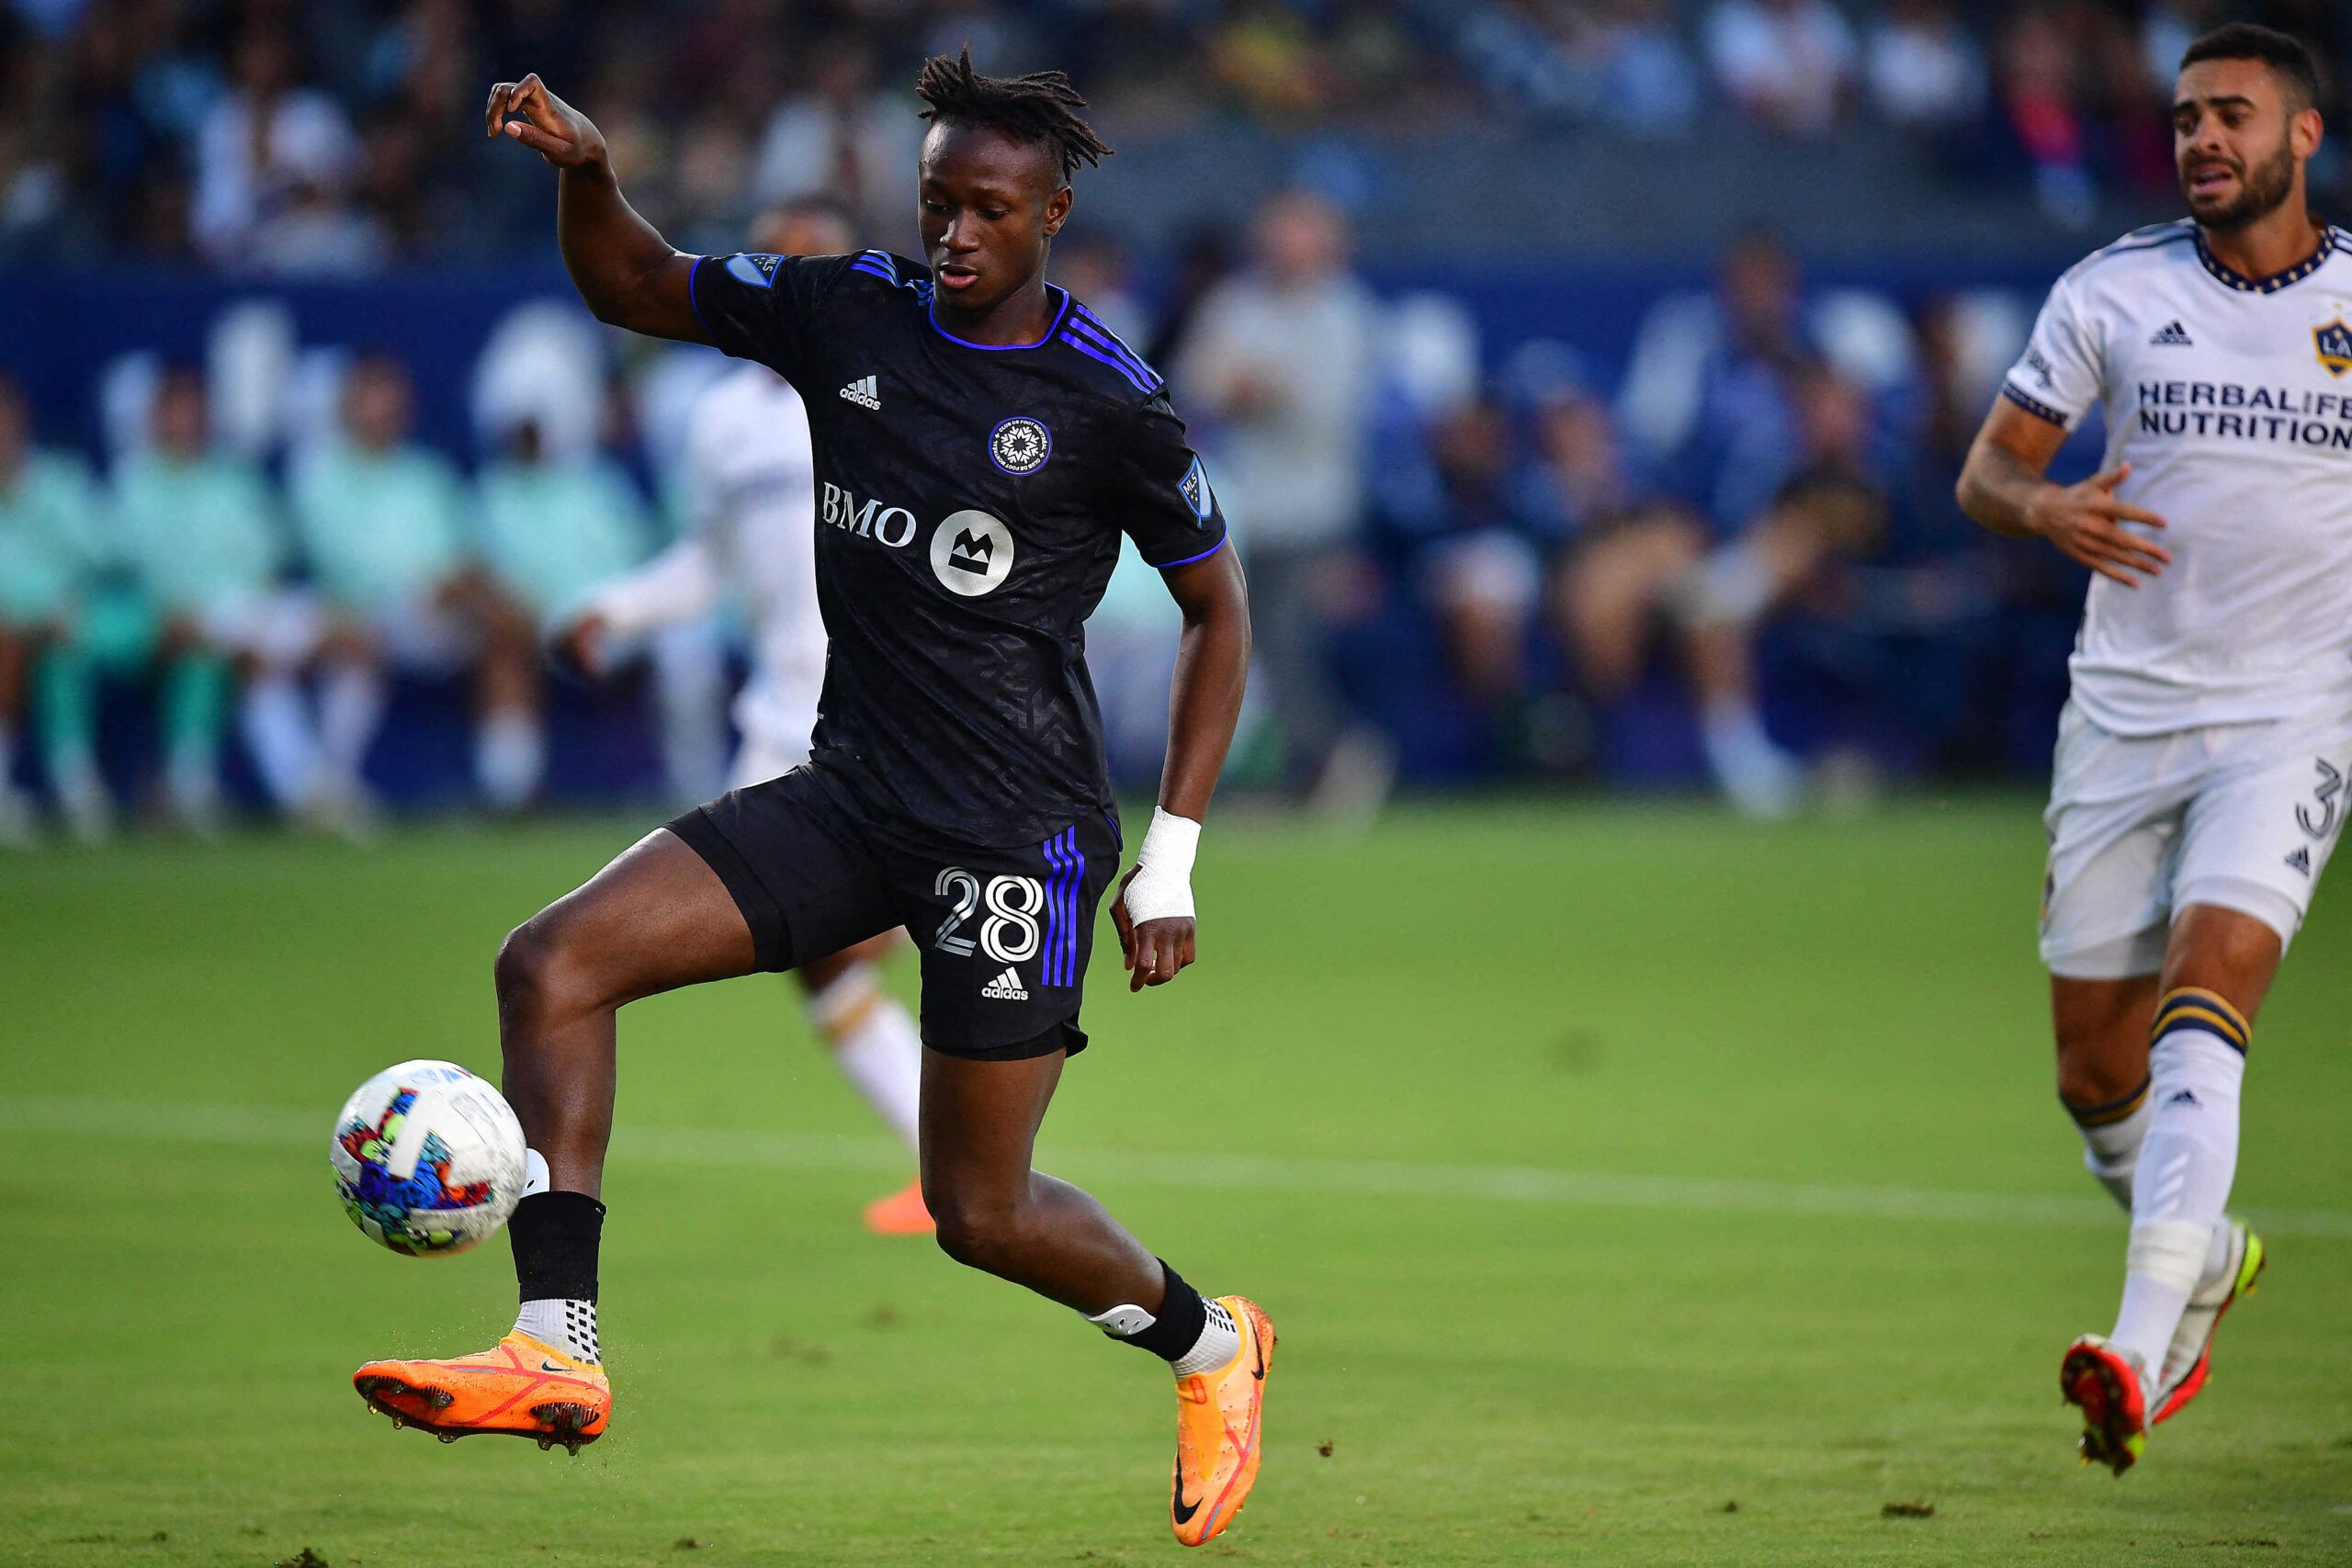 Jul 4, 2022; Carson, California, USA; CF Montrealmidfielder Ismael Kone (28) moves in for a shot on goal ahead of Los Angeles Galaxy defender Derrick Williams (3) during the first half at Dignity Health Sports Park. Mandatory Credit: Gary A. Vasquez-USA TODAY Sports